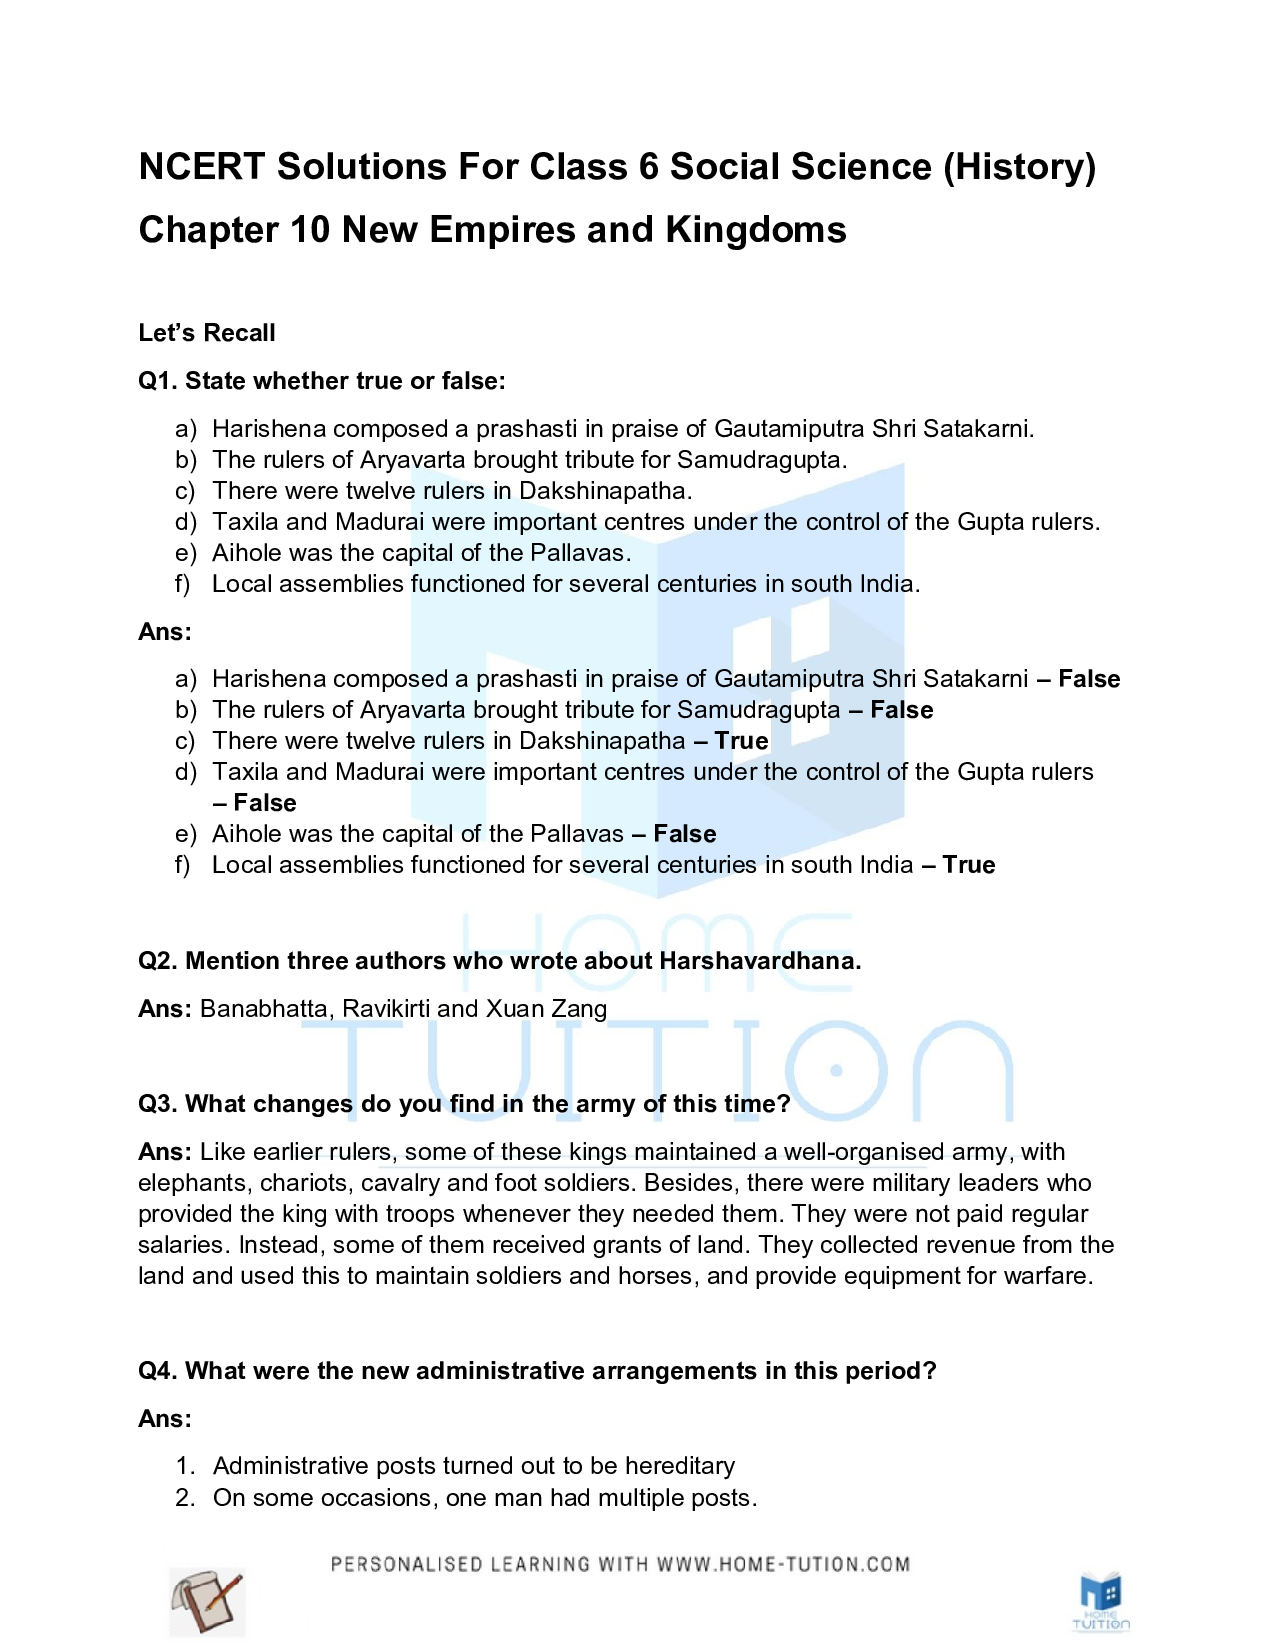 Chapter 10 New Empires and Kingdoms